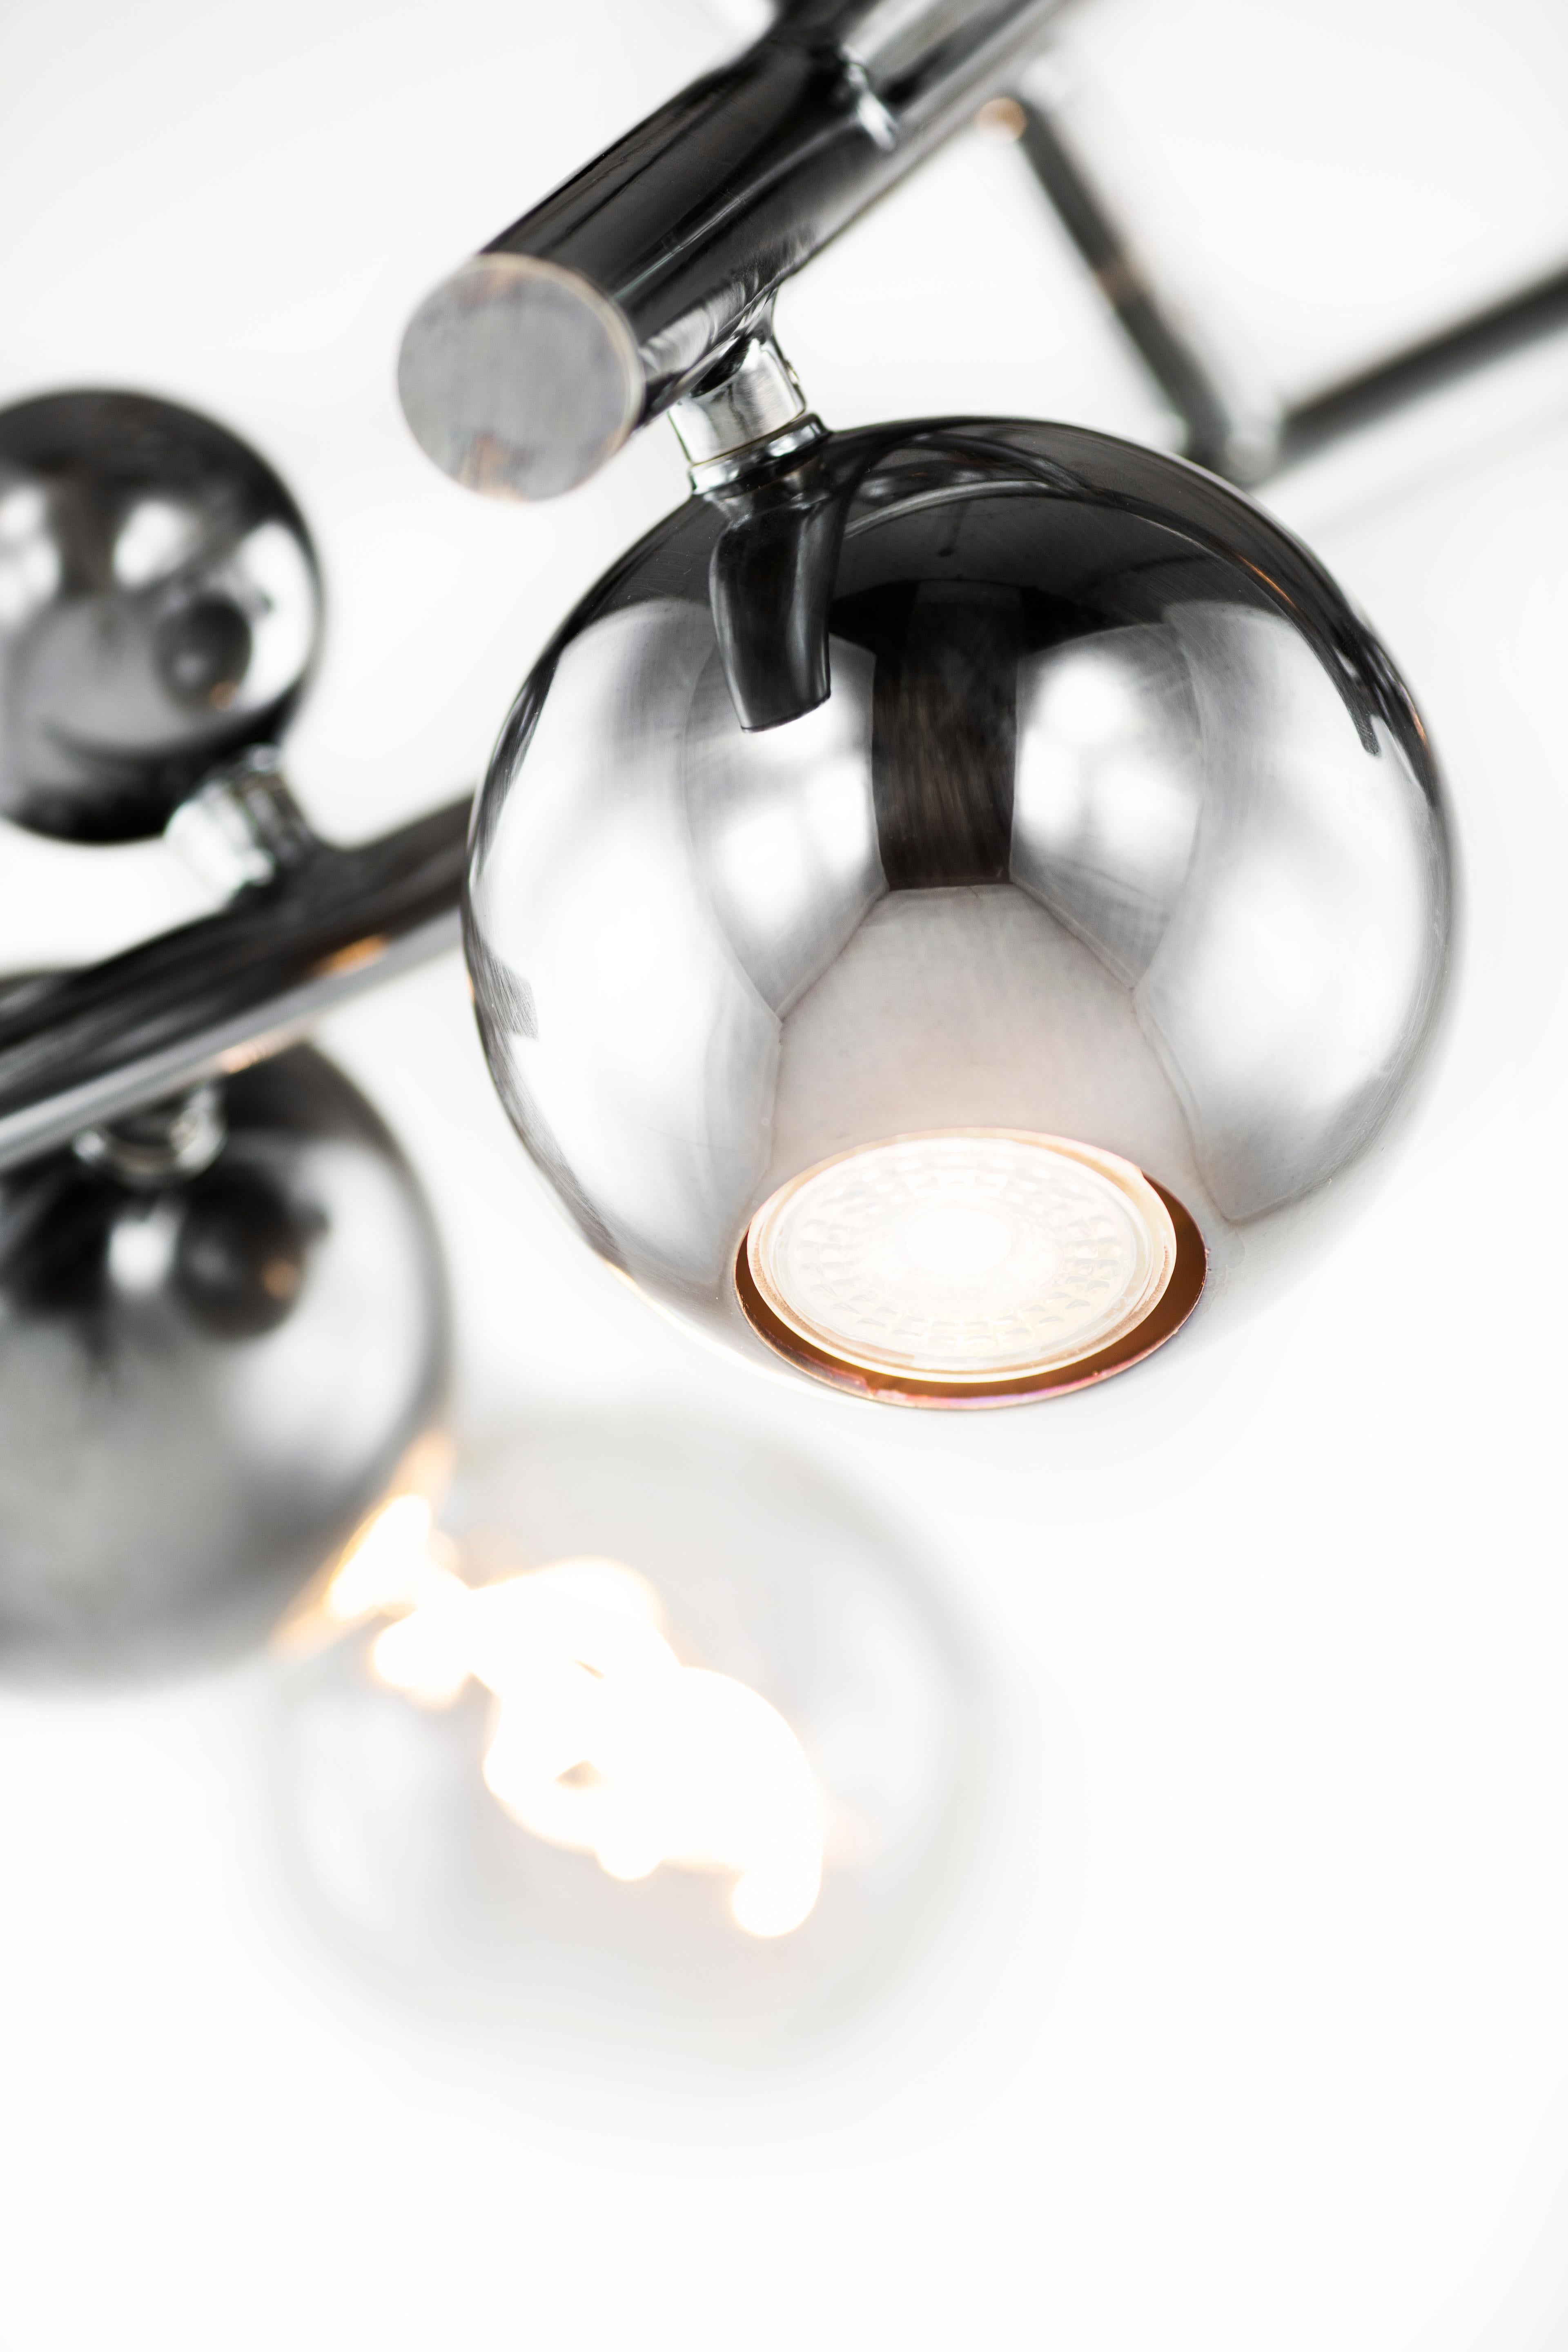 The Galaxy, a modern pendant in a nickel aged finish, is designed by William Brand, founder of Brand van Egmond. Created to bring character into any interior, the pendant is available in the finishes black matt, nickel, brass, brass burnished, and